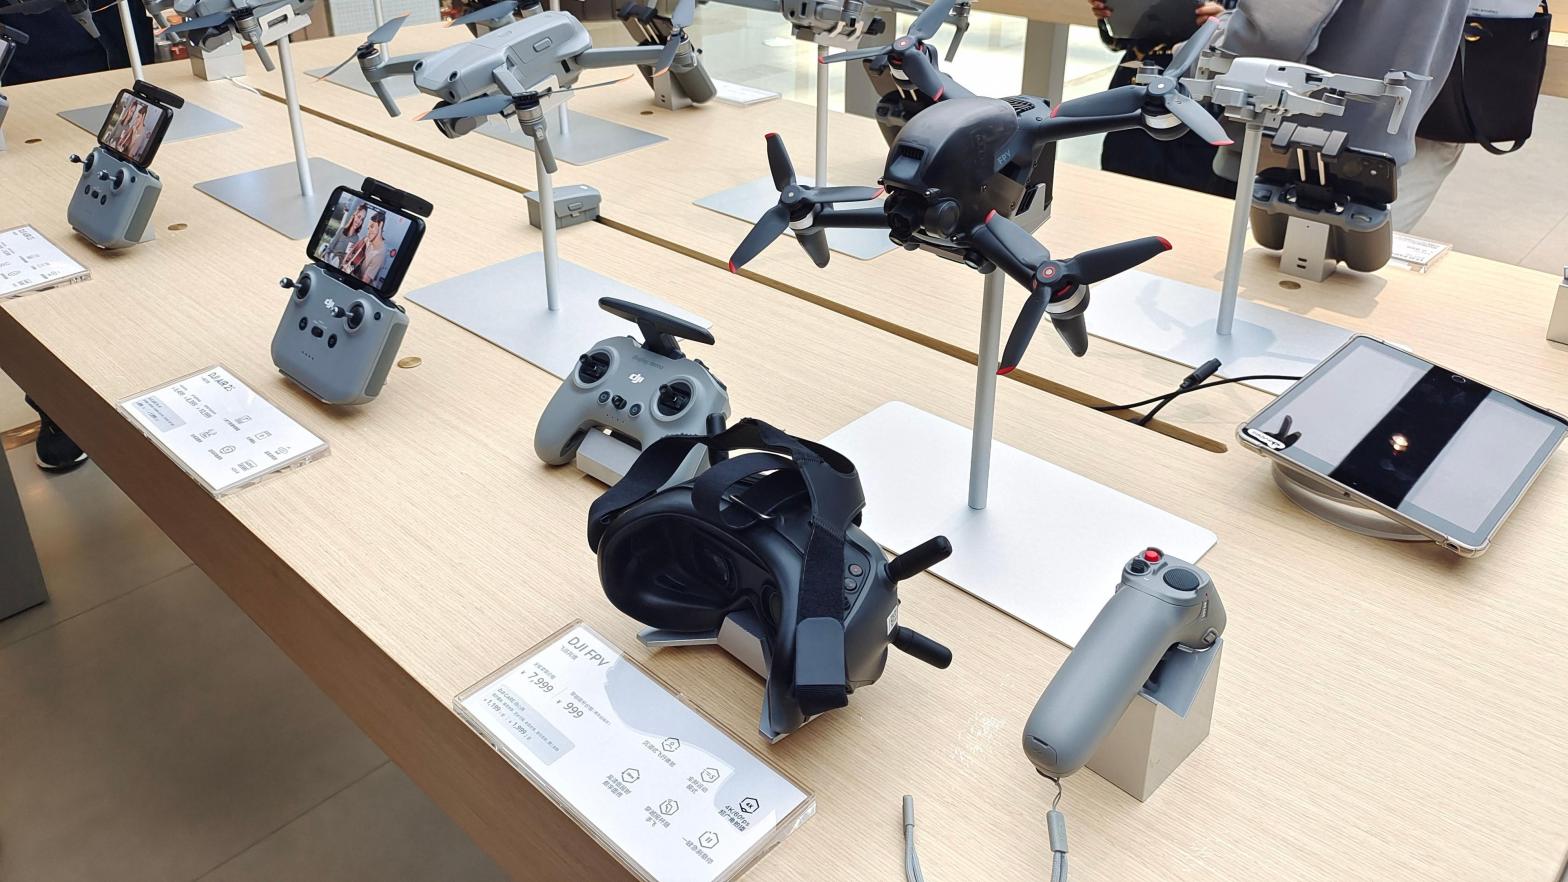 A display at a DJI drone store in Shanghai, China, on December 18, 2021. (Photo: CFOTO/Future Publishing, Getty Images)